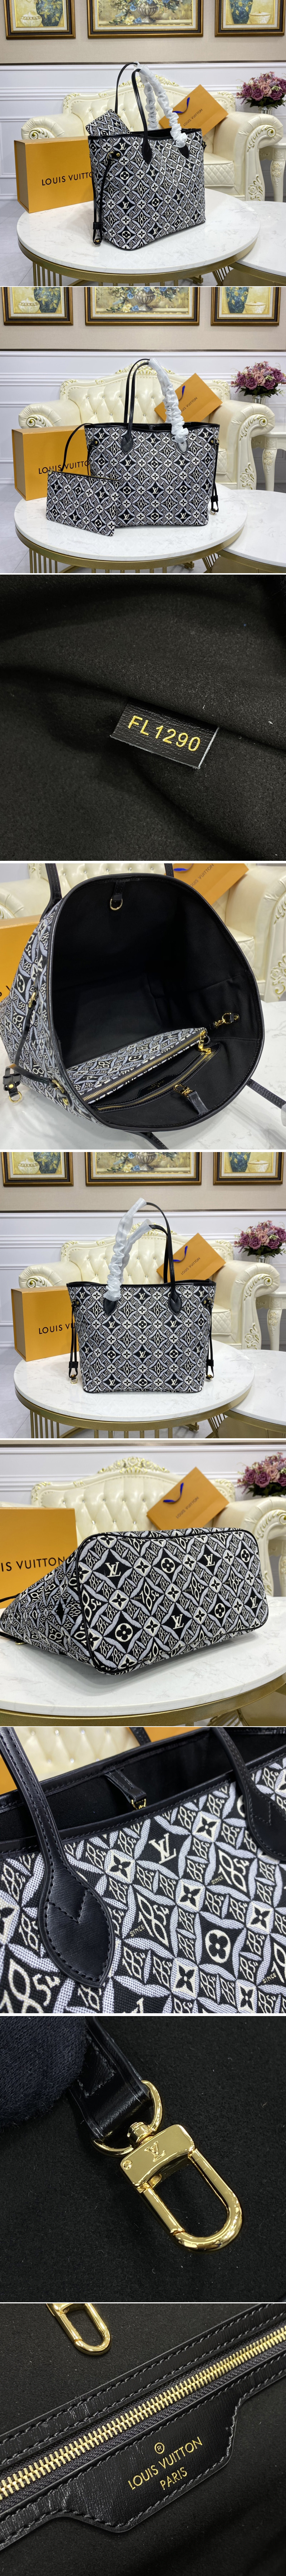 Replica Louis Vuitton Since 1854 Neverfull MM Tote Bag M57230 for